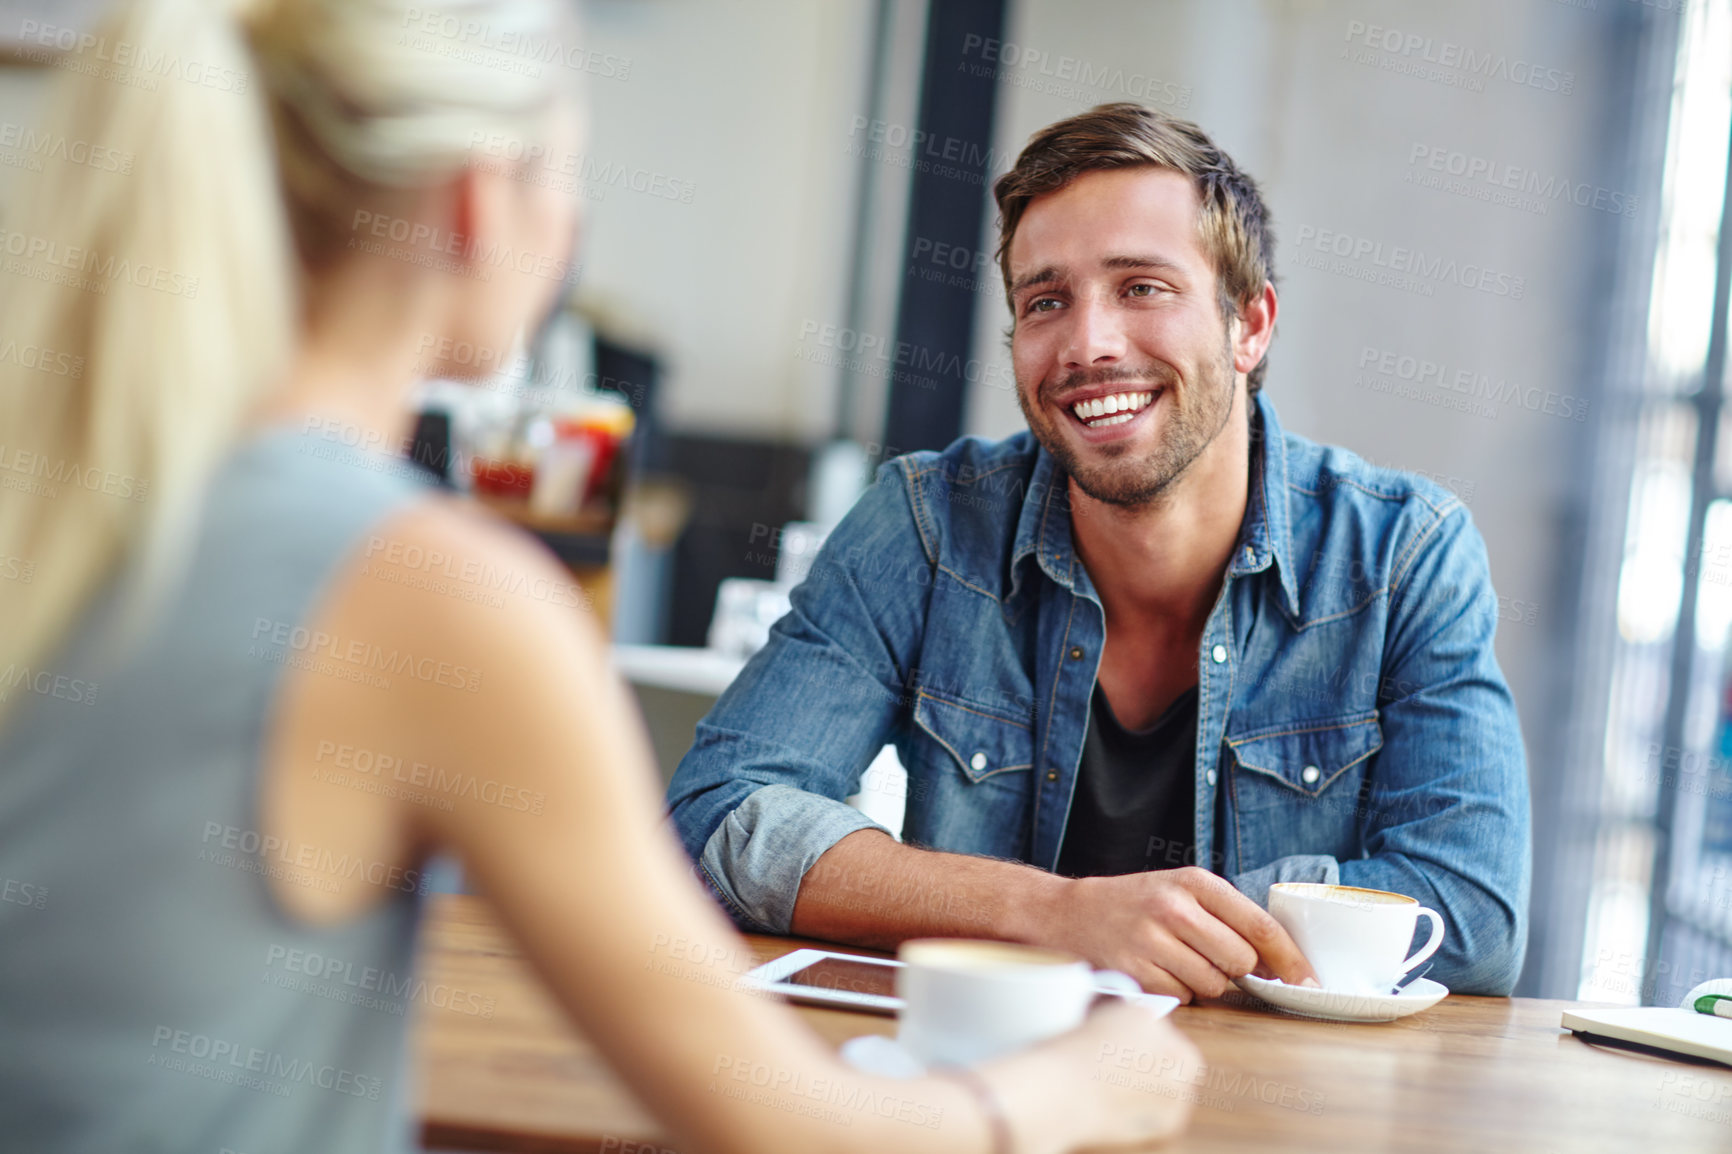 Buy stock photo Shot of a loving young couple on a coffee shop date